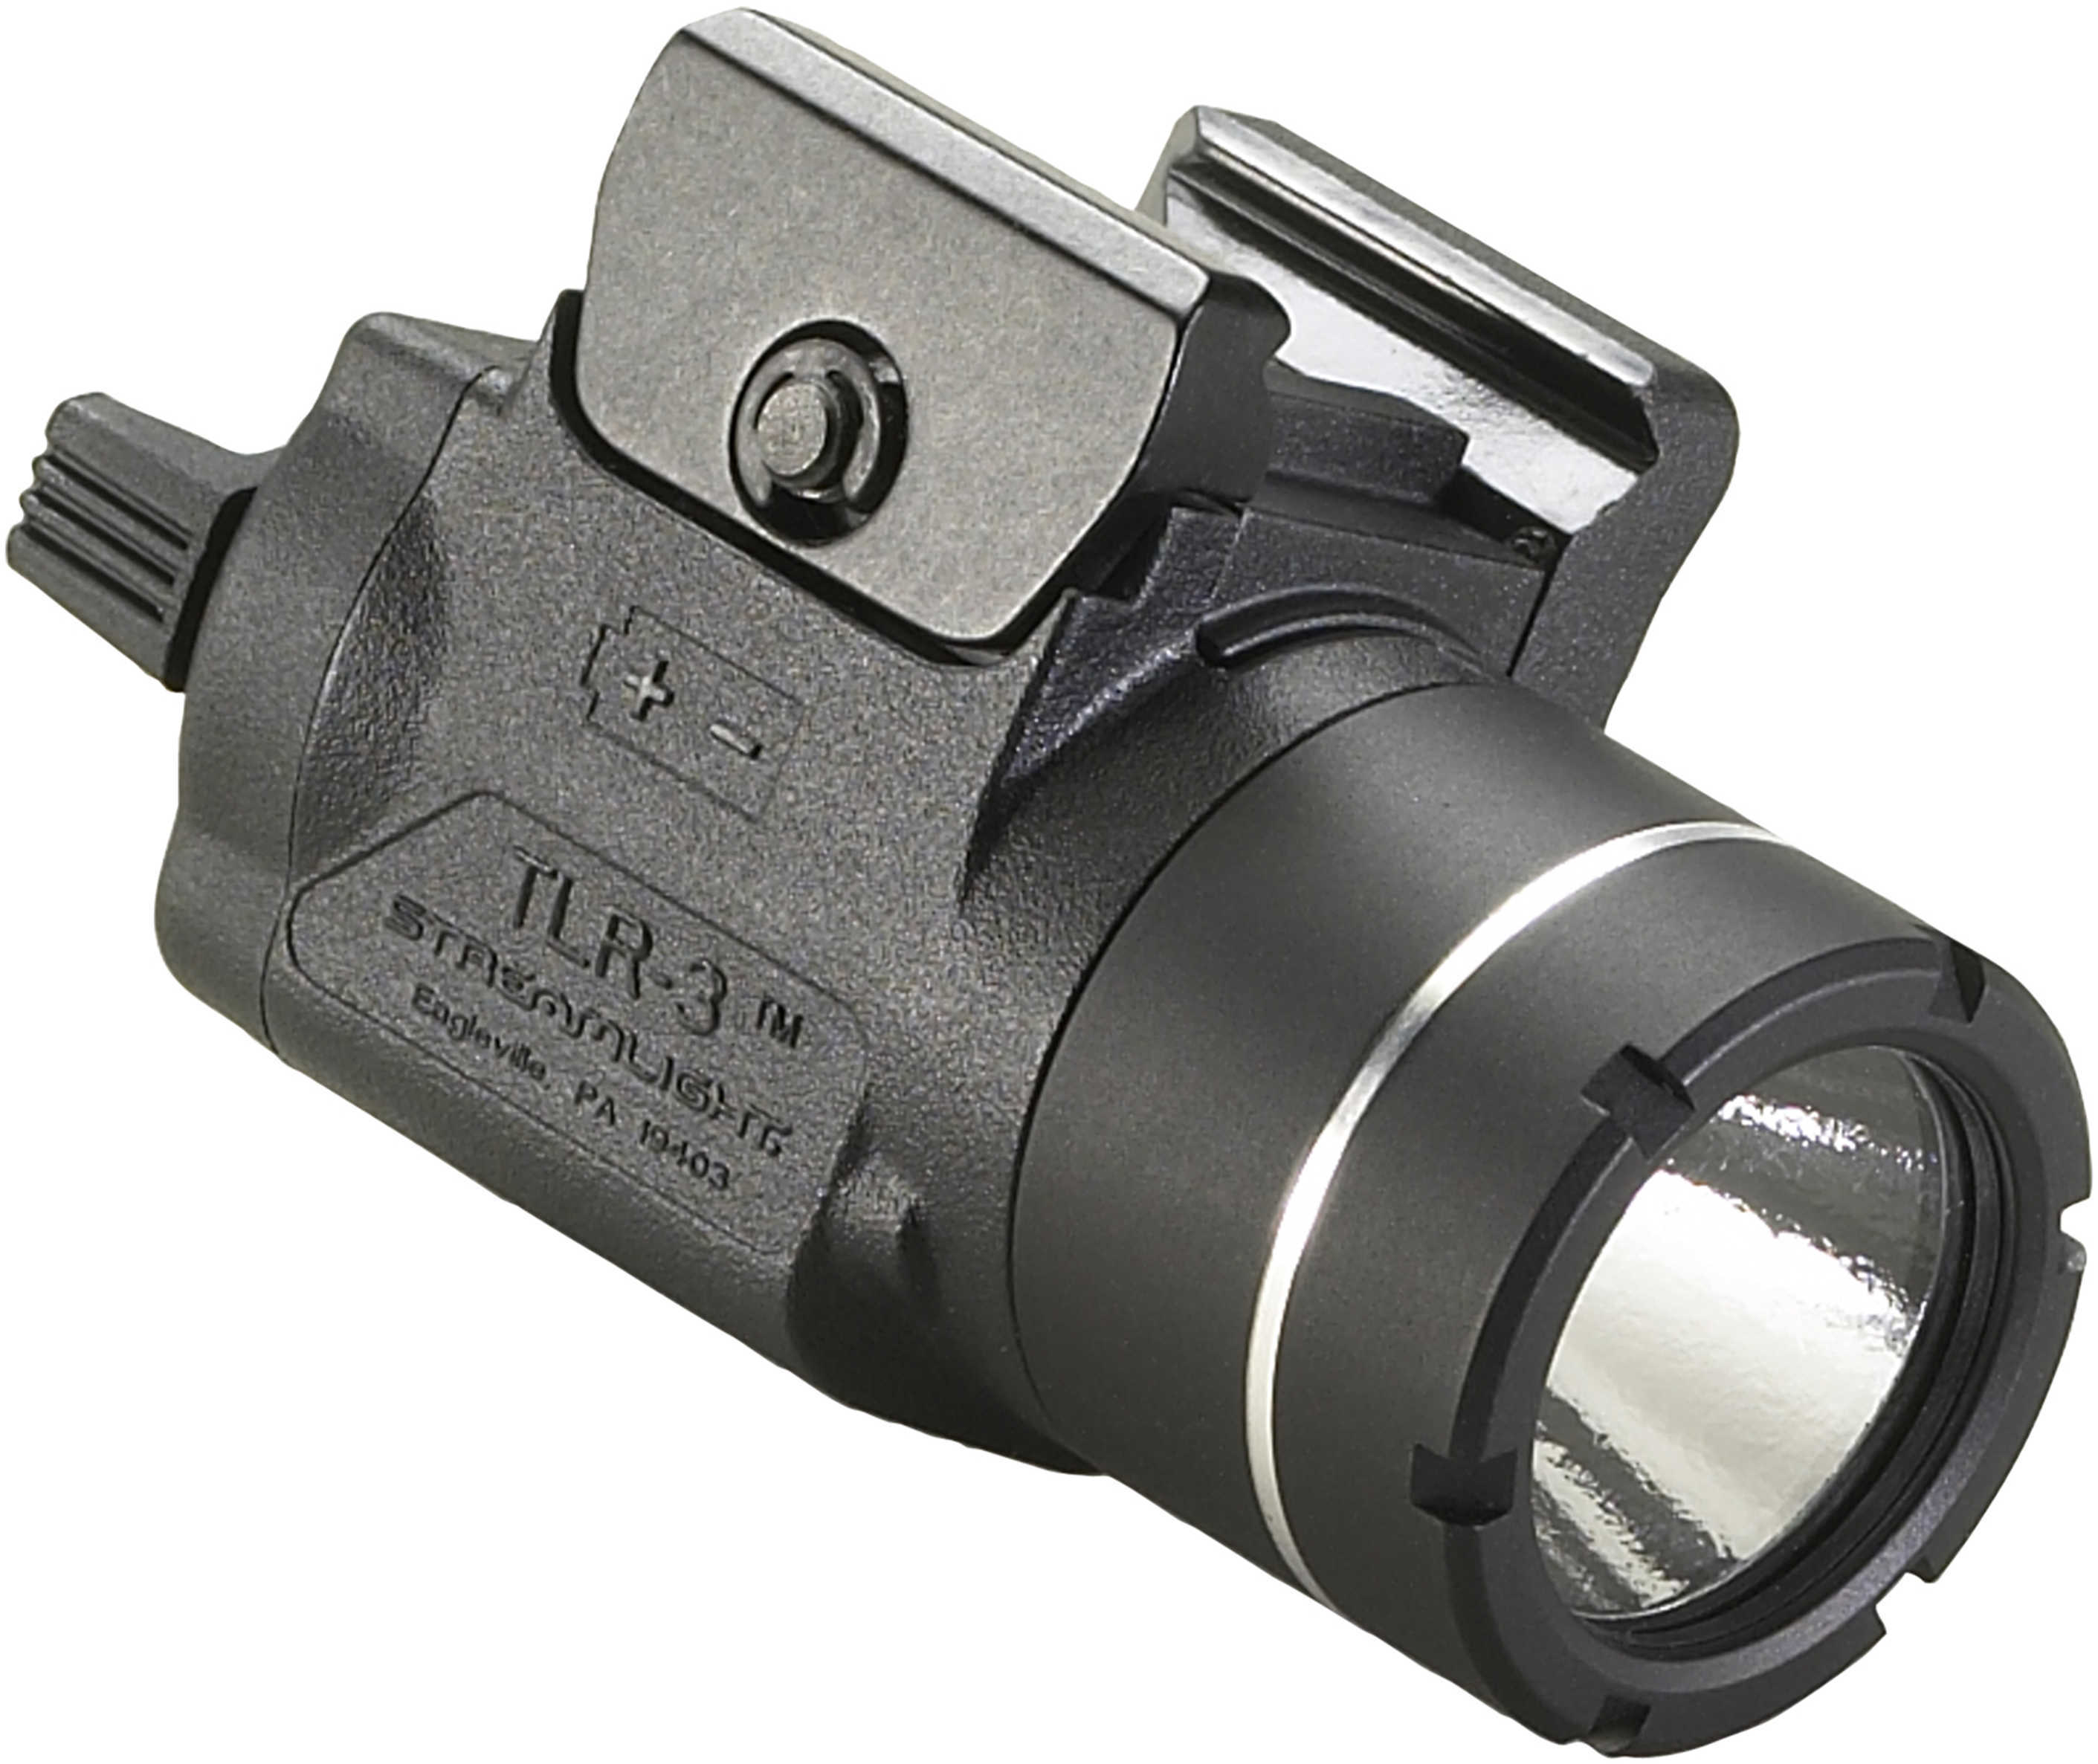 Streamlight TLR-3 Compact Rail Mounted Tactical Light C4 Led With 50,000 Hour Lifetime - Impact Resistant Engineering Po